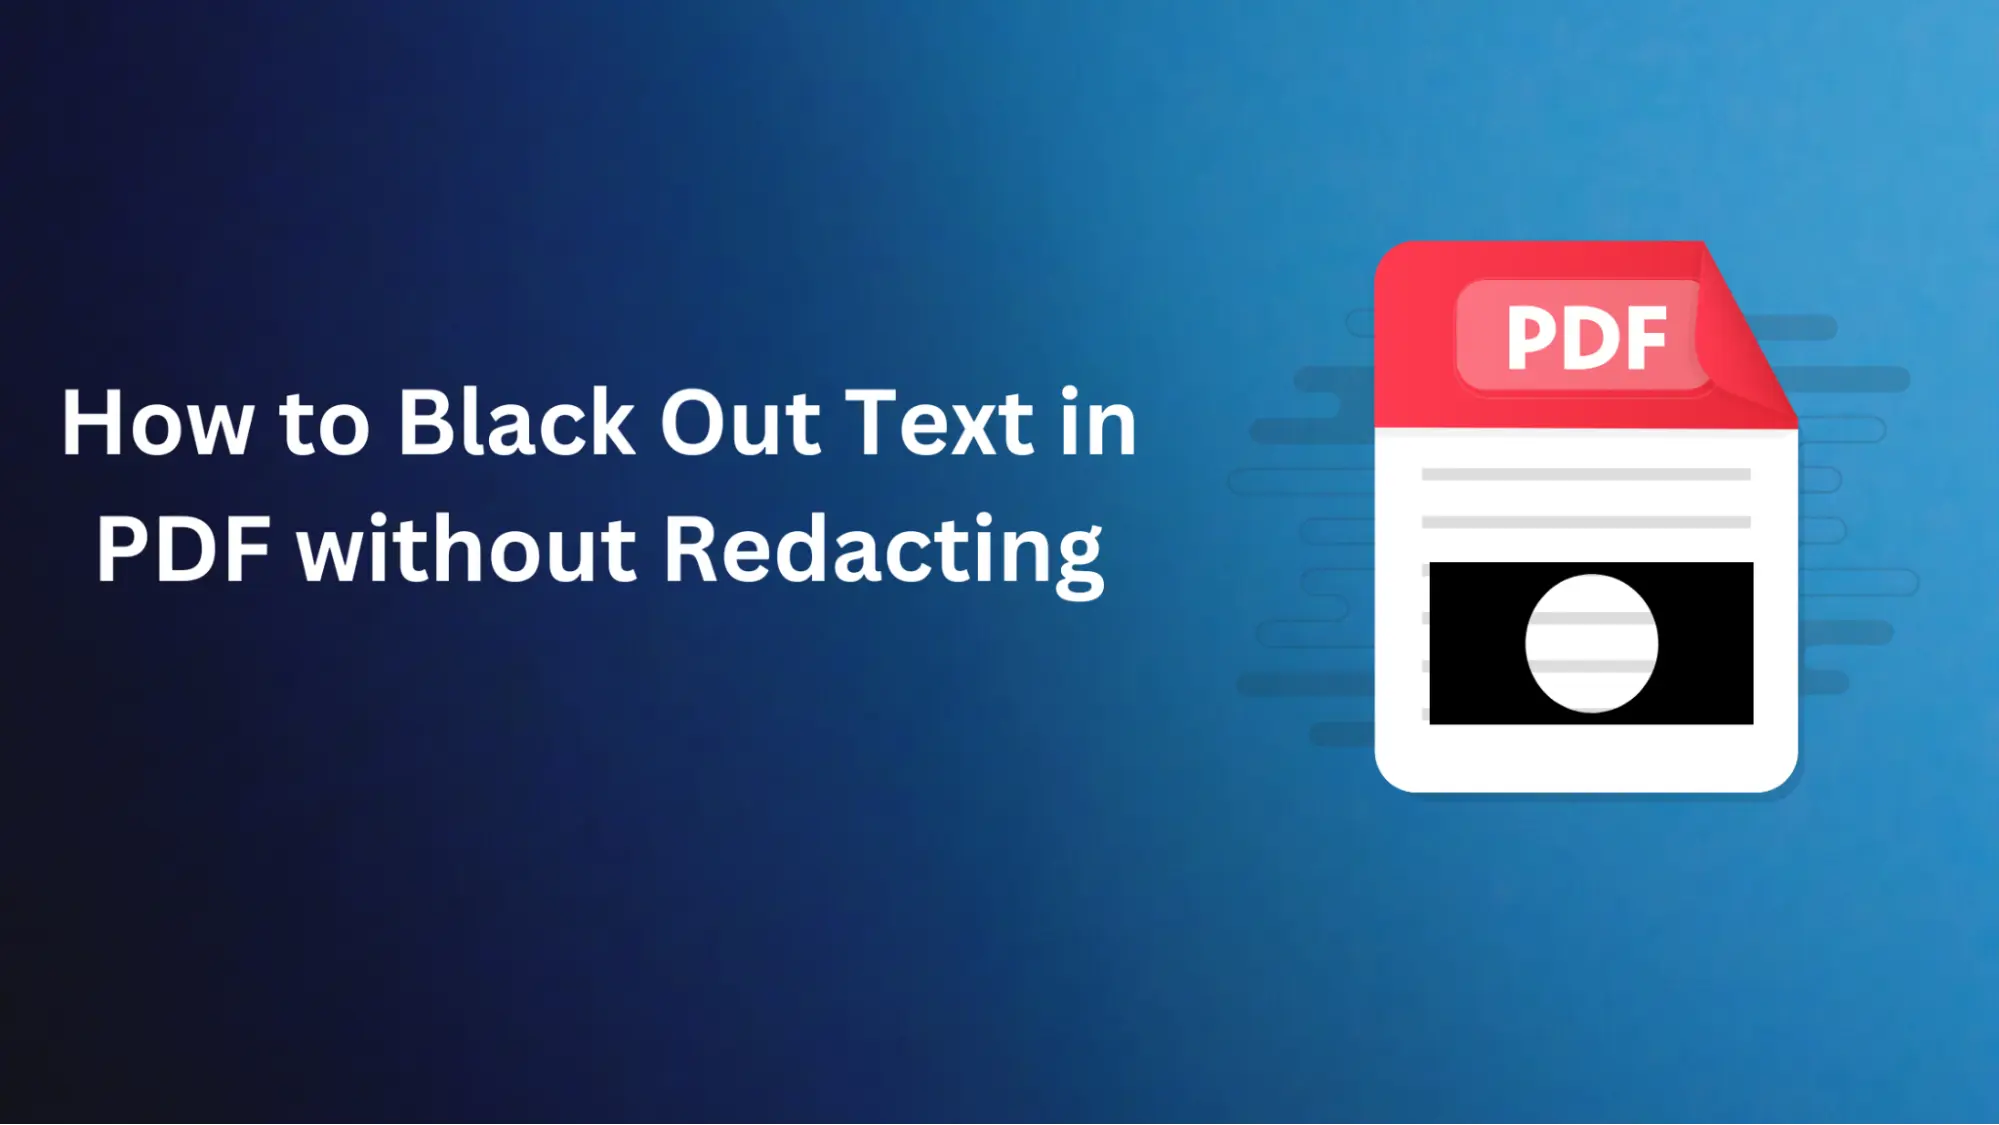 How to Black Out Text in PDF without Redacting